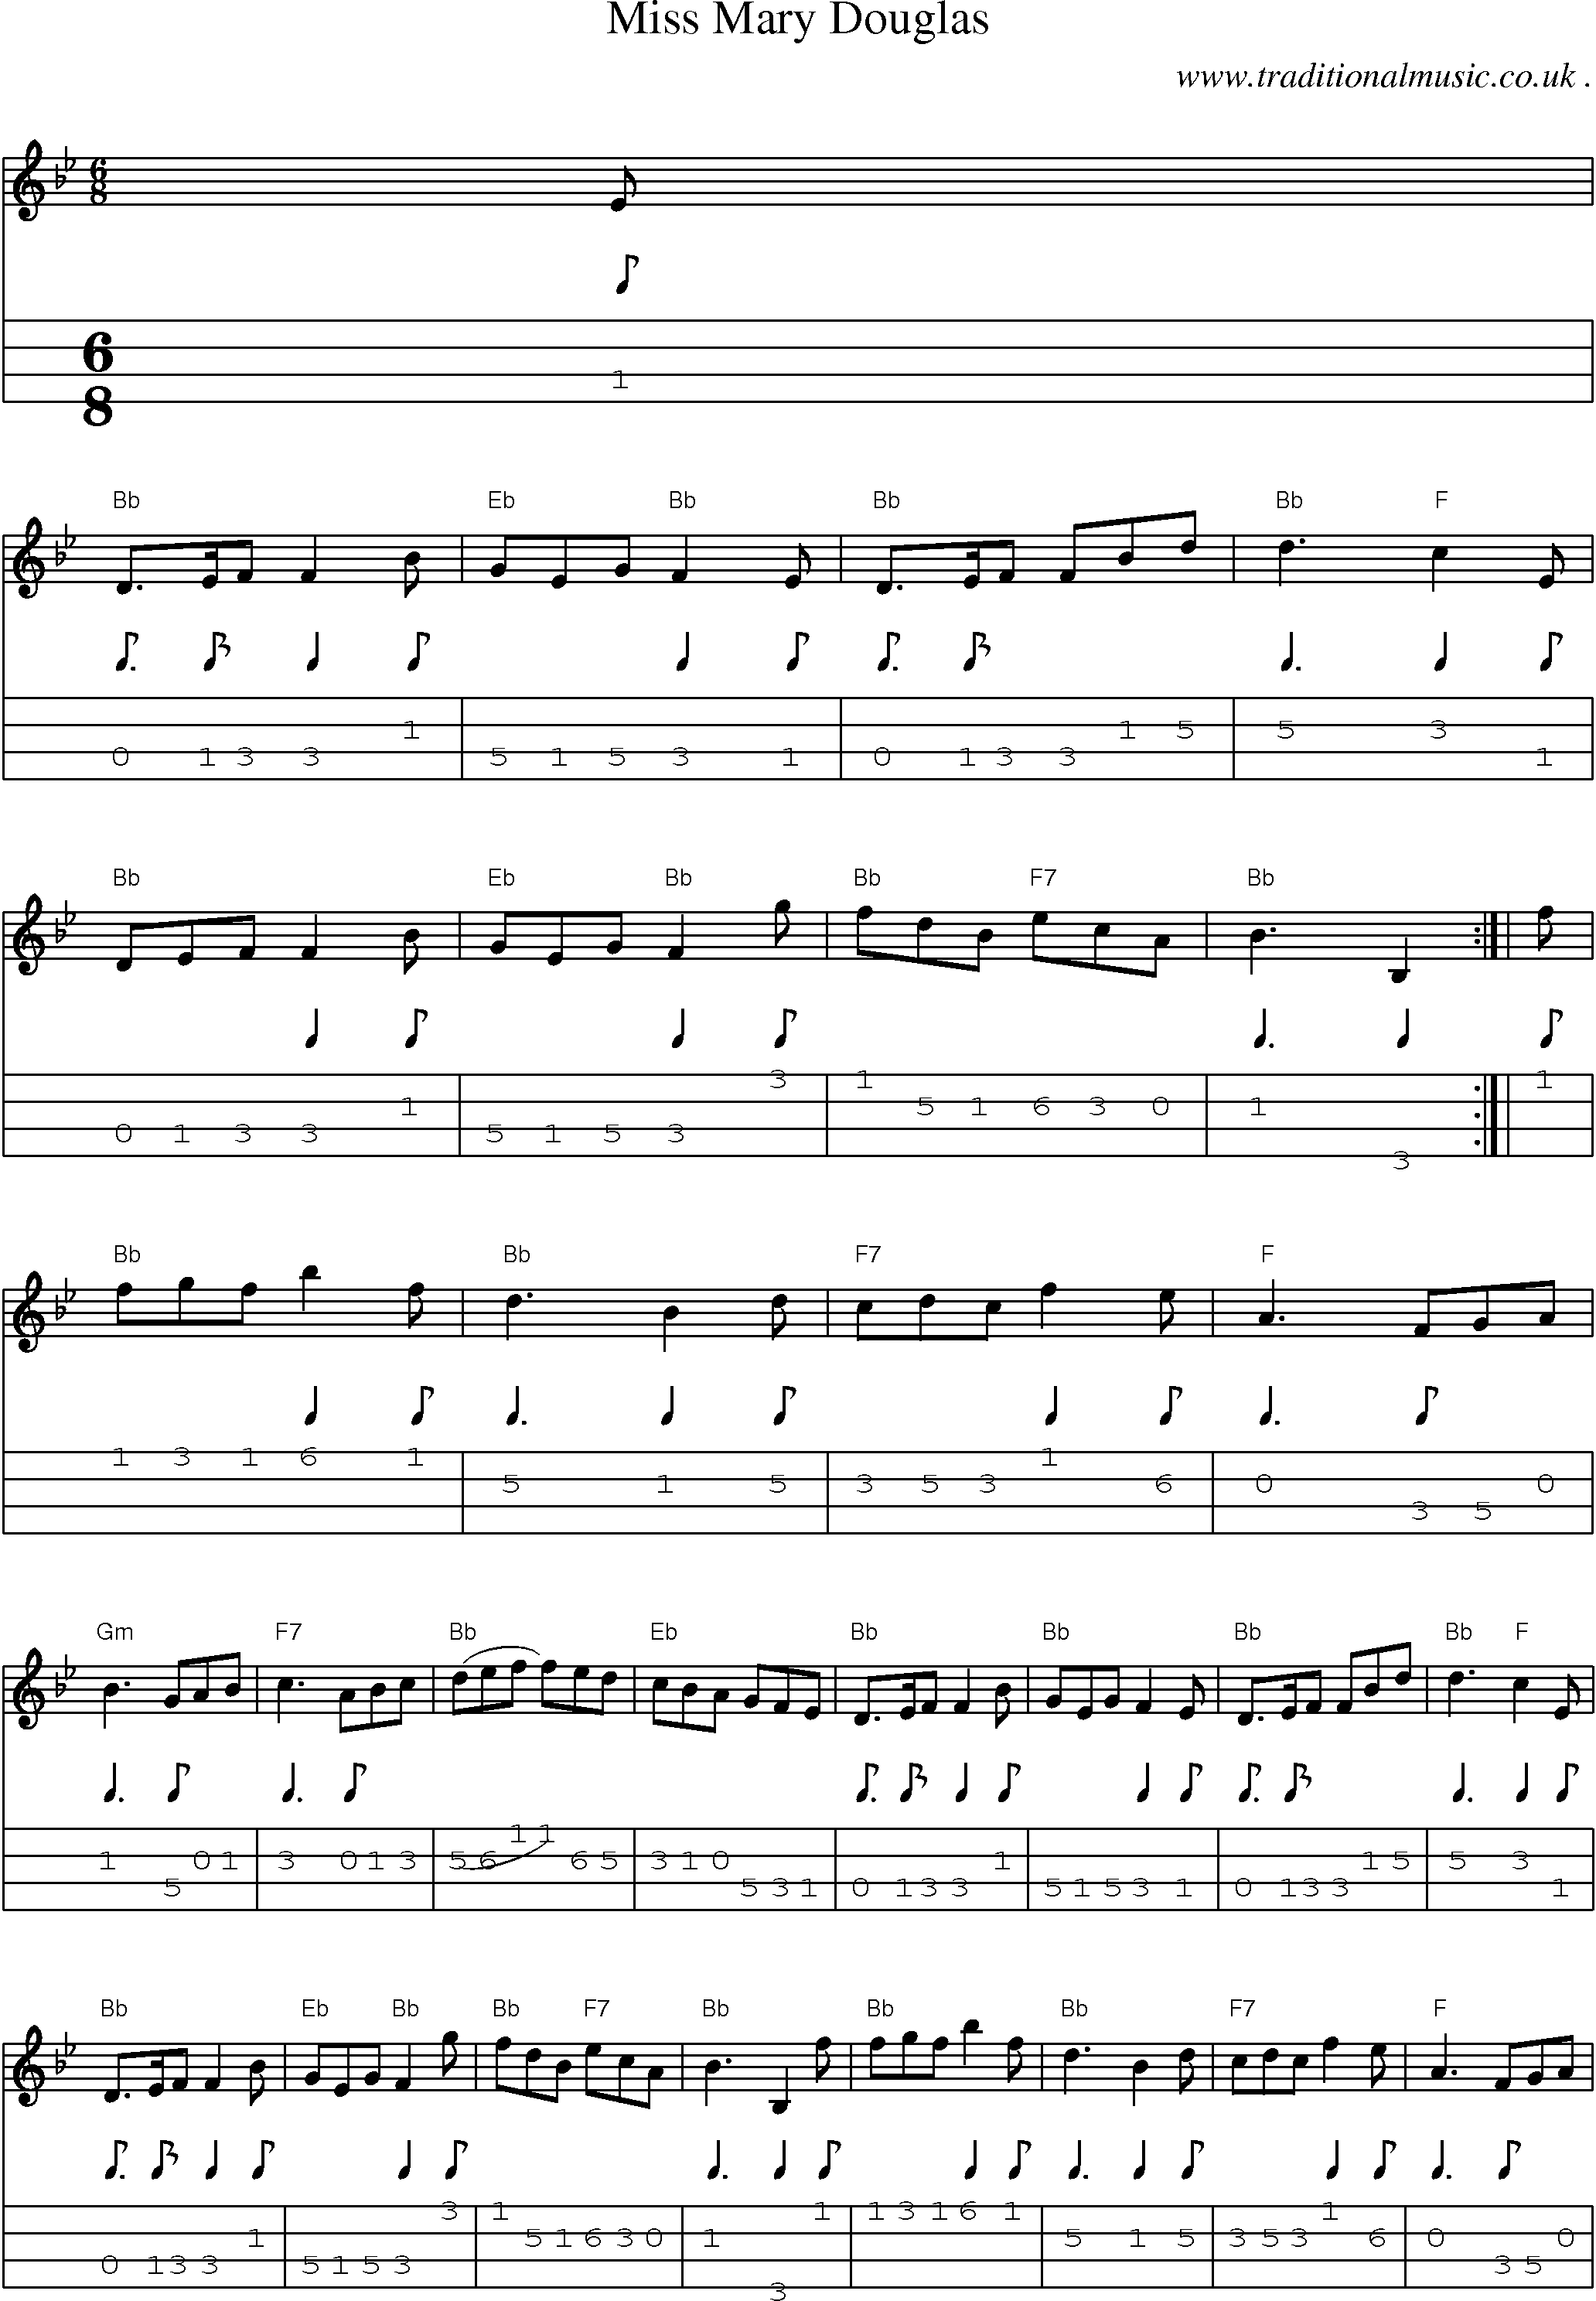 Sheet-music  score, Chords and Mandolin Tabs for Miss Mary Douglas